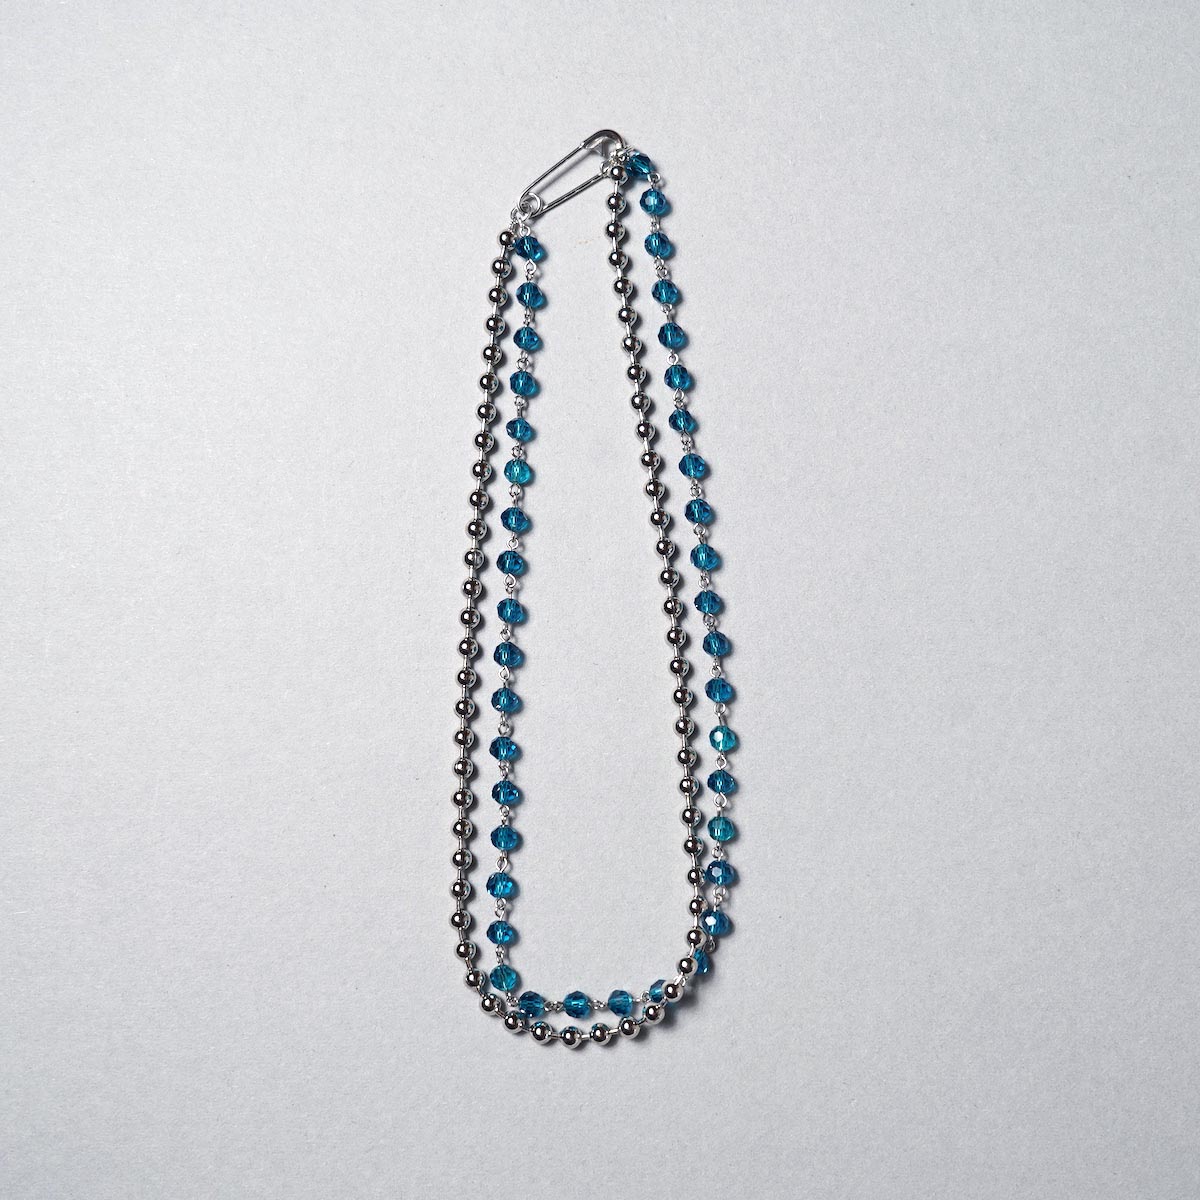 The Soloist / sa.0025AW22 single glass beads with ball chain neck lace. (Blue)